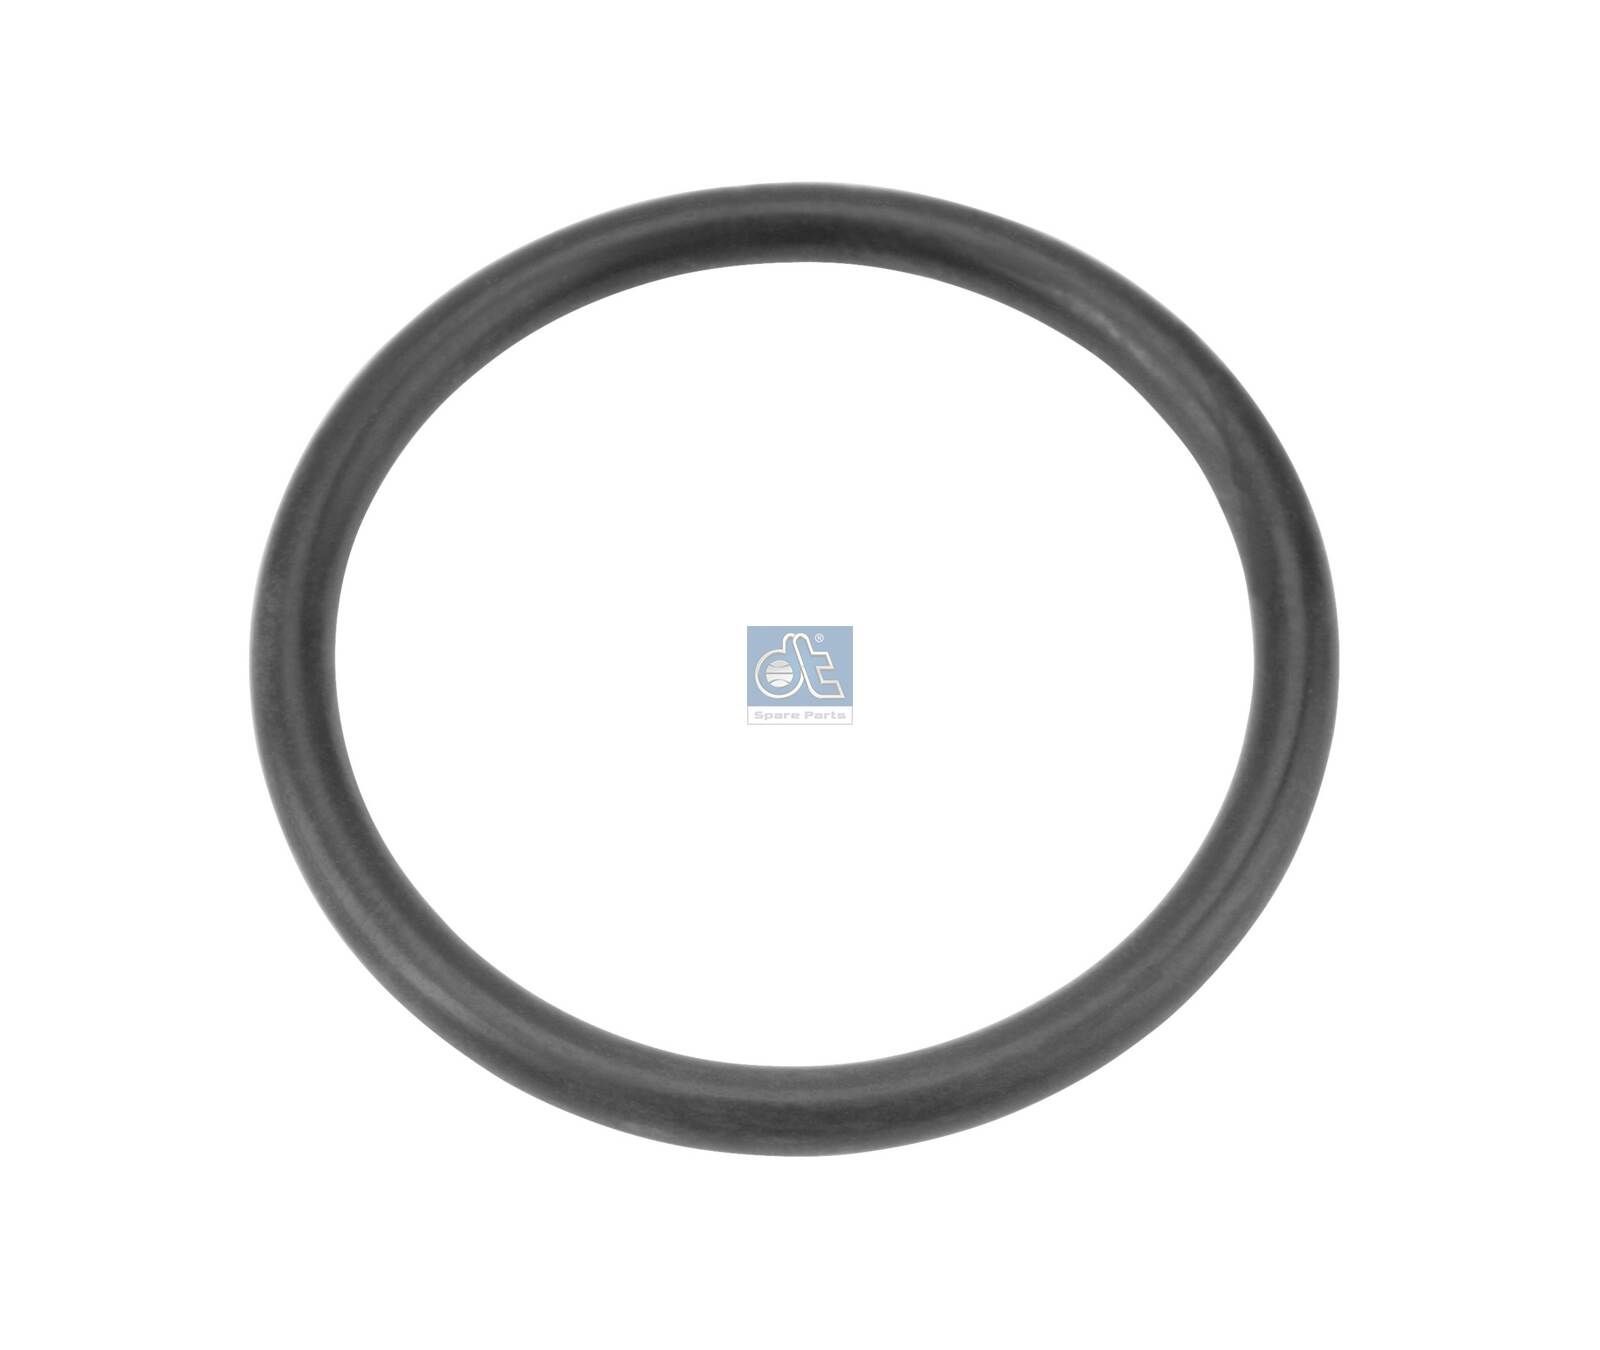 DT Spare Parts 3.10175 Seal Ring 36,5 x 3,5 mm, O-Ring, NBR (nitrile butadiene rubber)